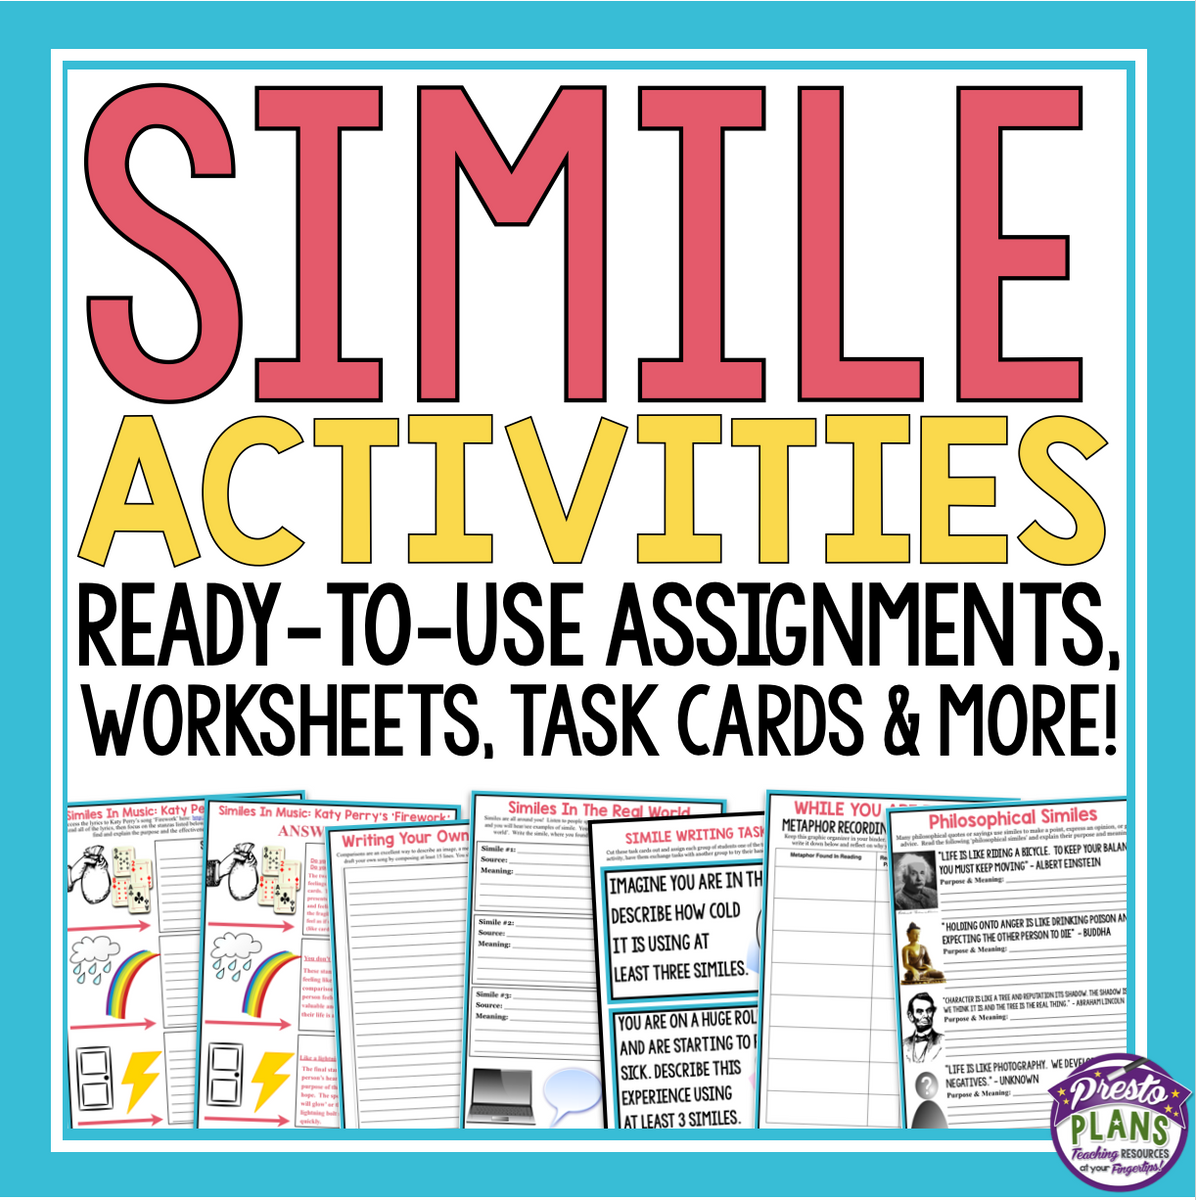 simile-activities-assignments-task-cards-more-presto-plans